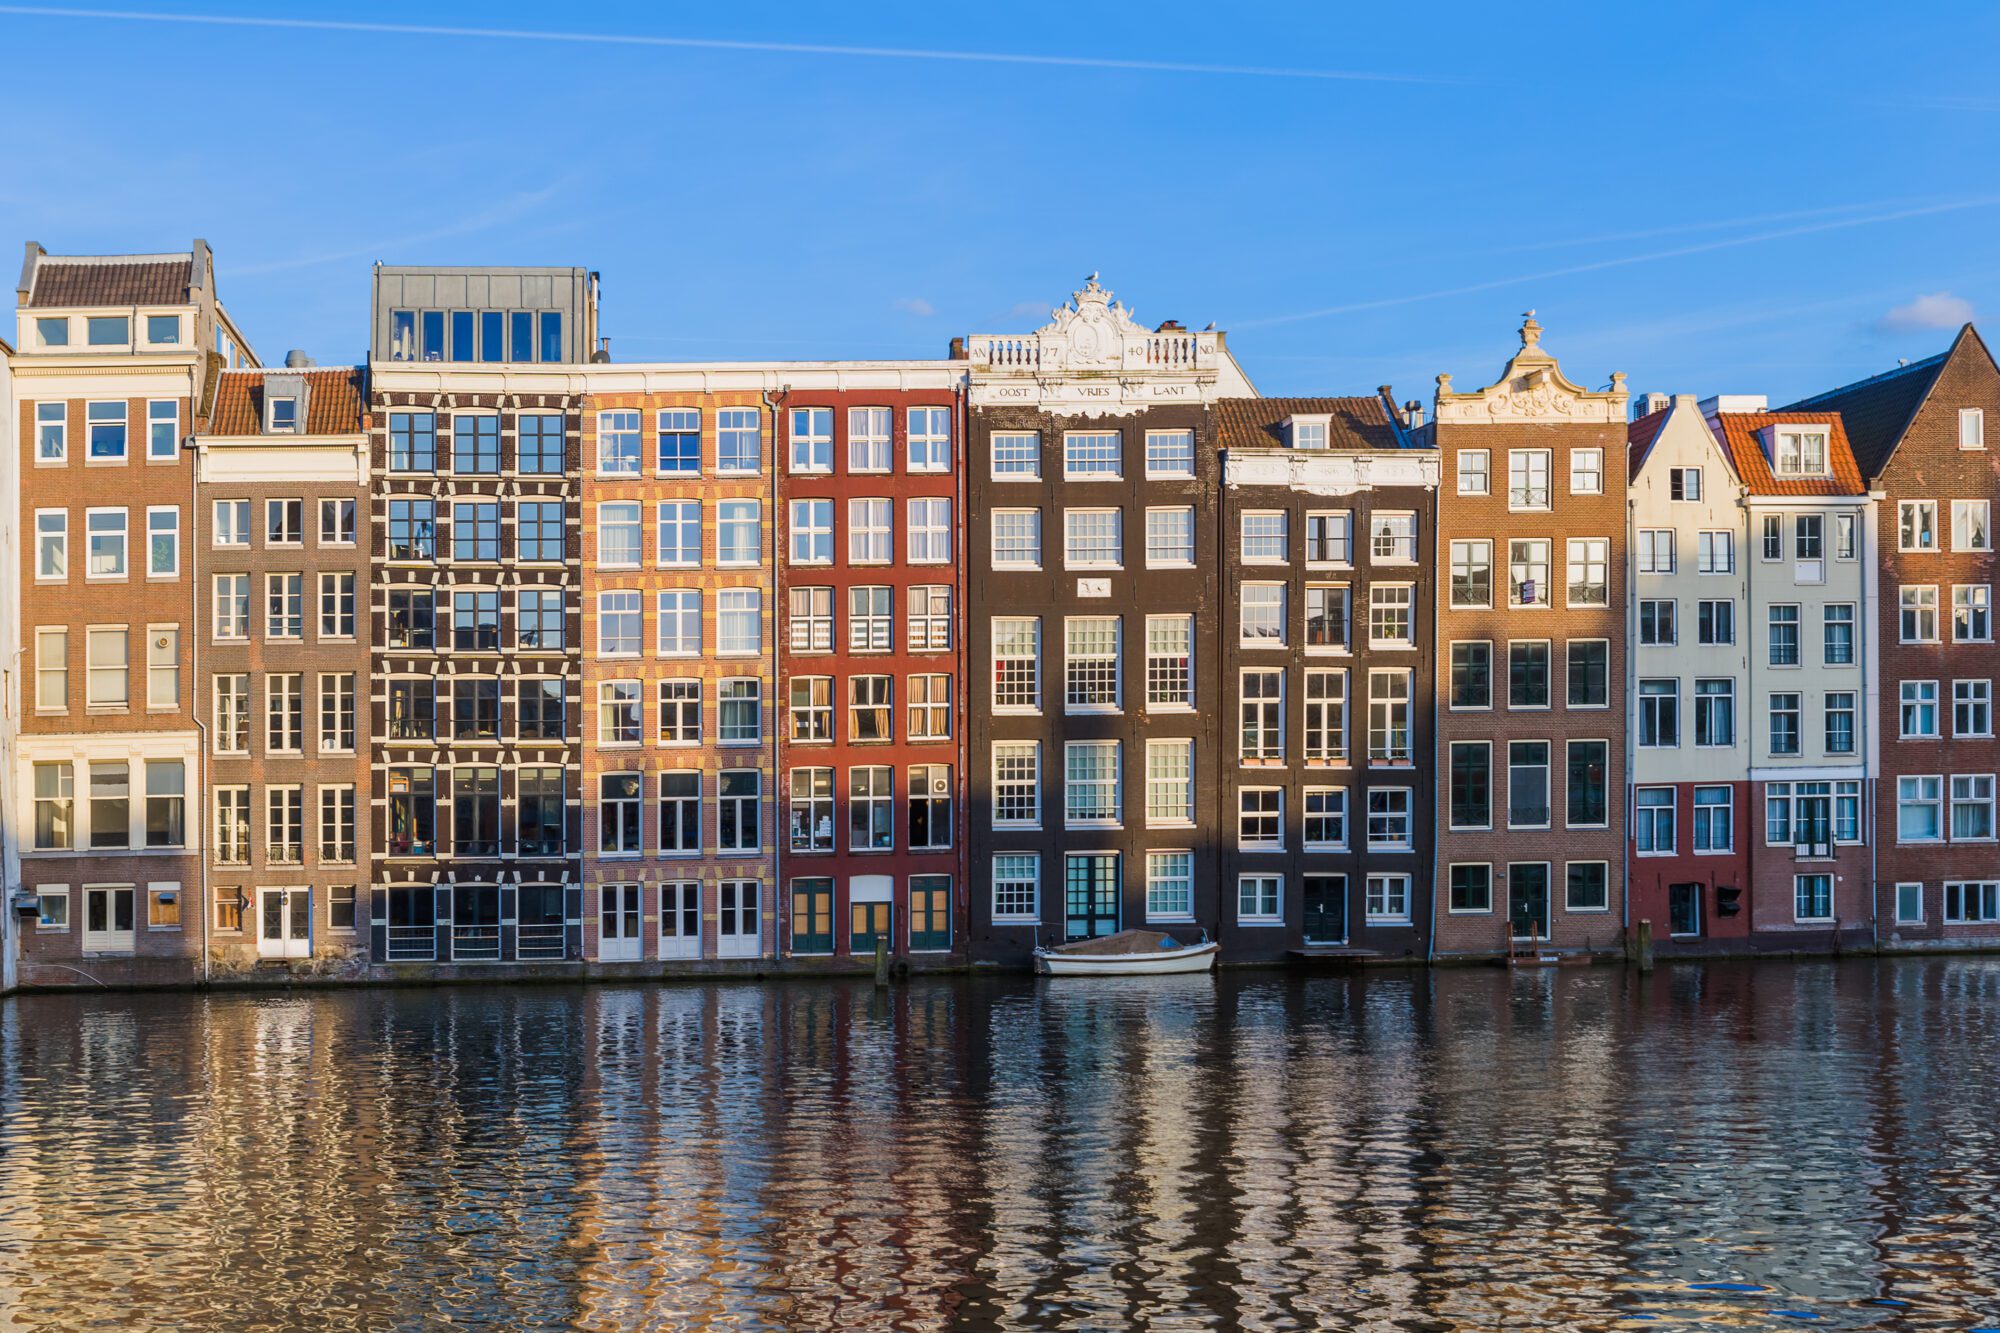 City Guide Amsterdam, English Version - Art of Living - Books and